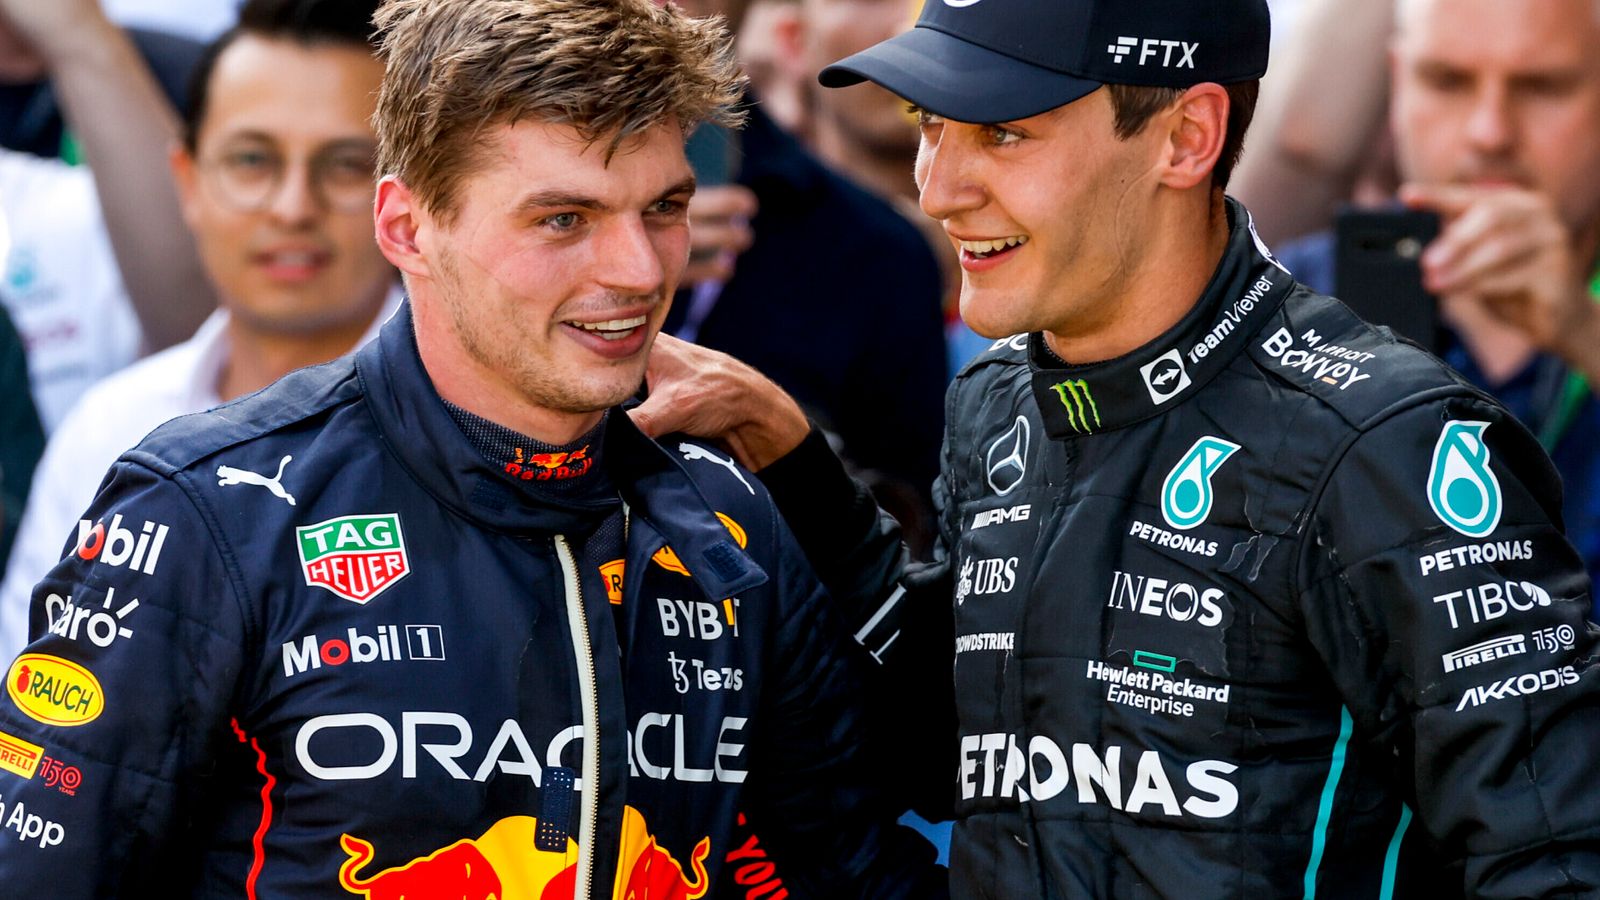 Martin Brundle on Spanish GP: Max Verstappen's 'angry' win, Charles Leclerc's bad luck and Mercedes back in the fight